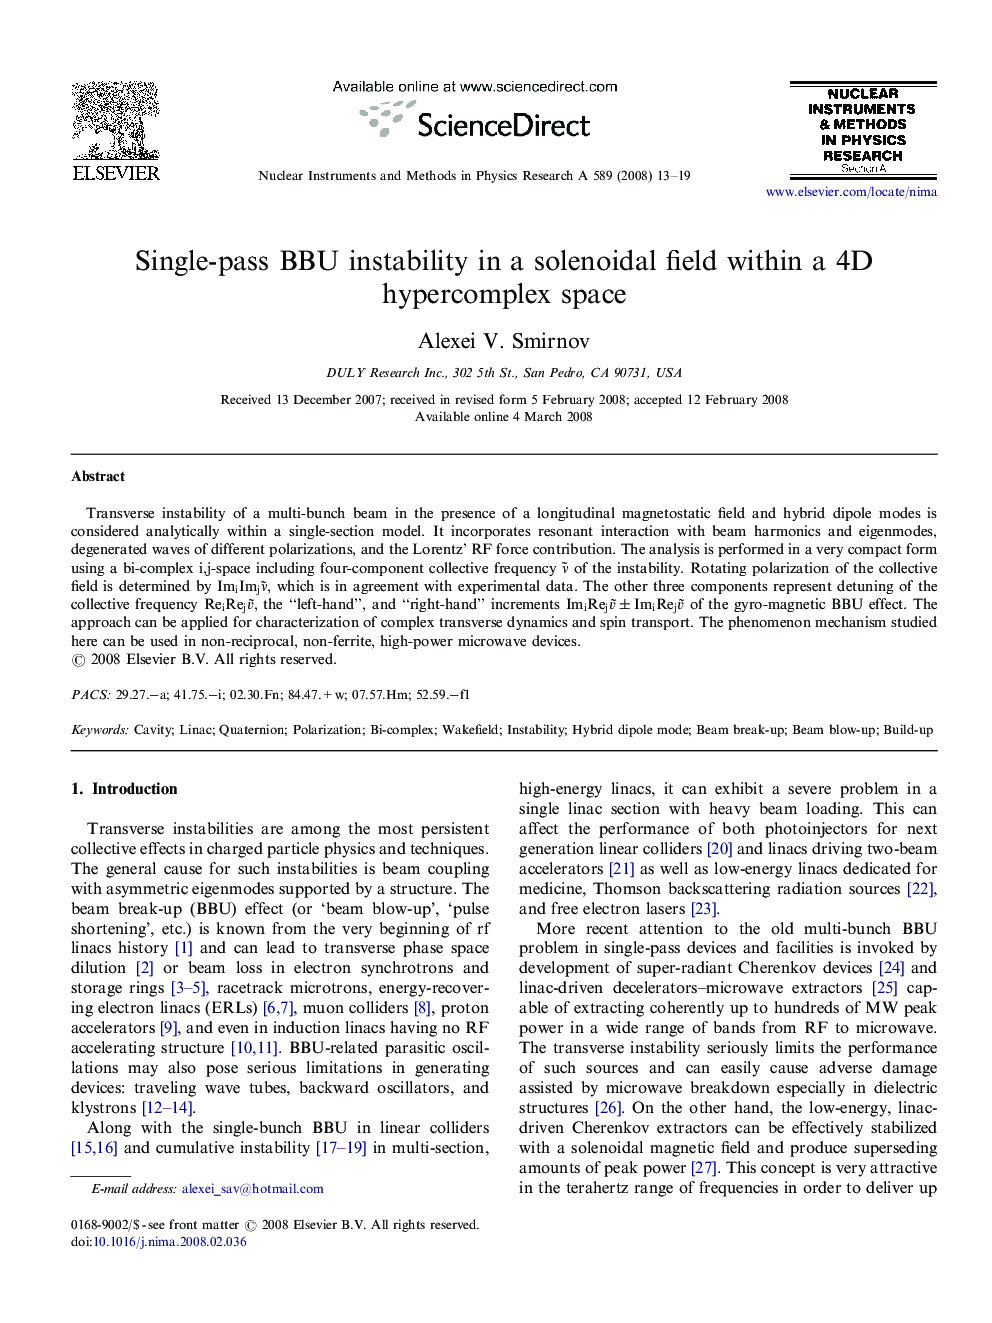 Single-pass BBU instability in a solenoidal field within a 4D hypercomplex space